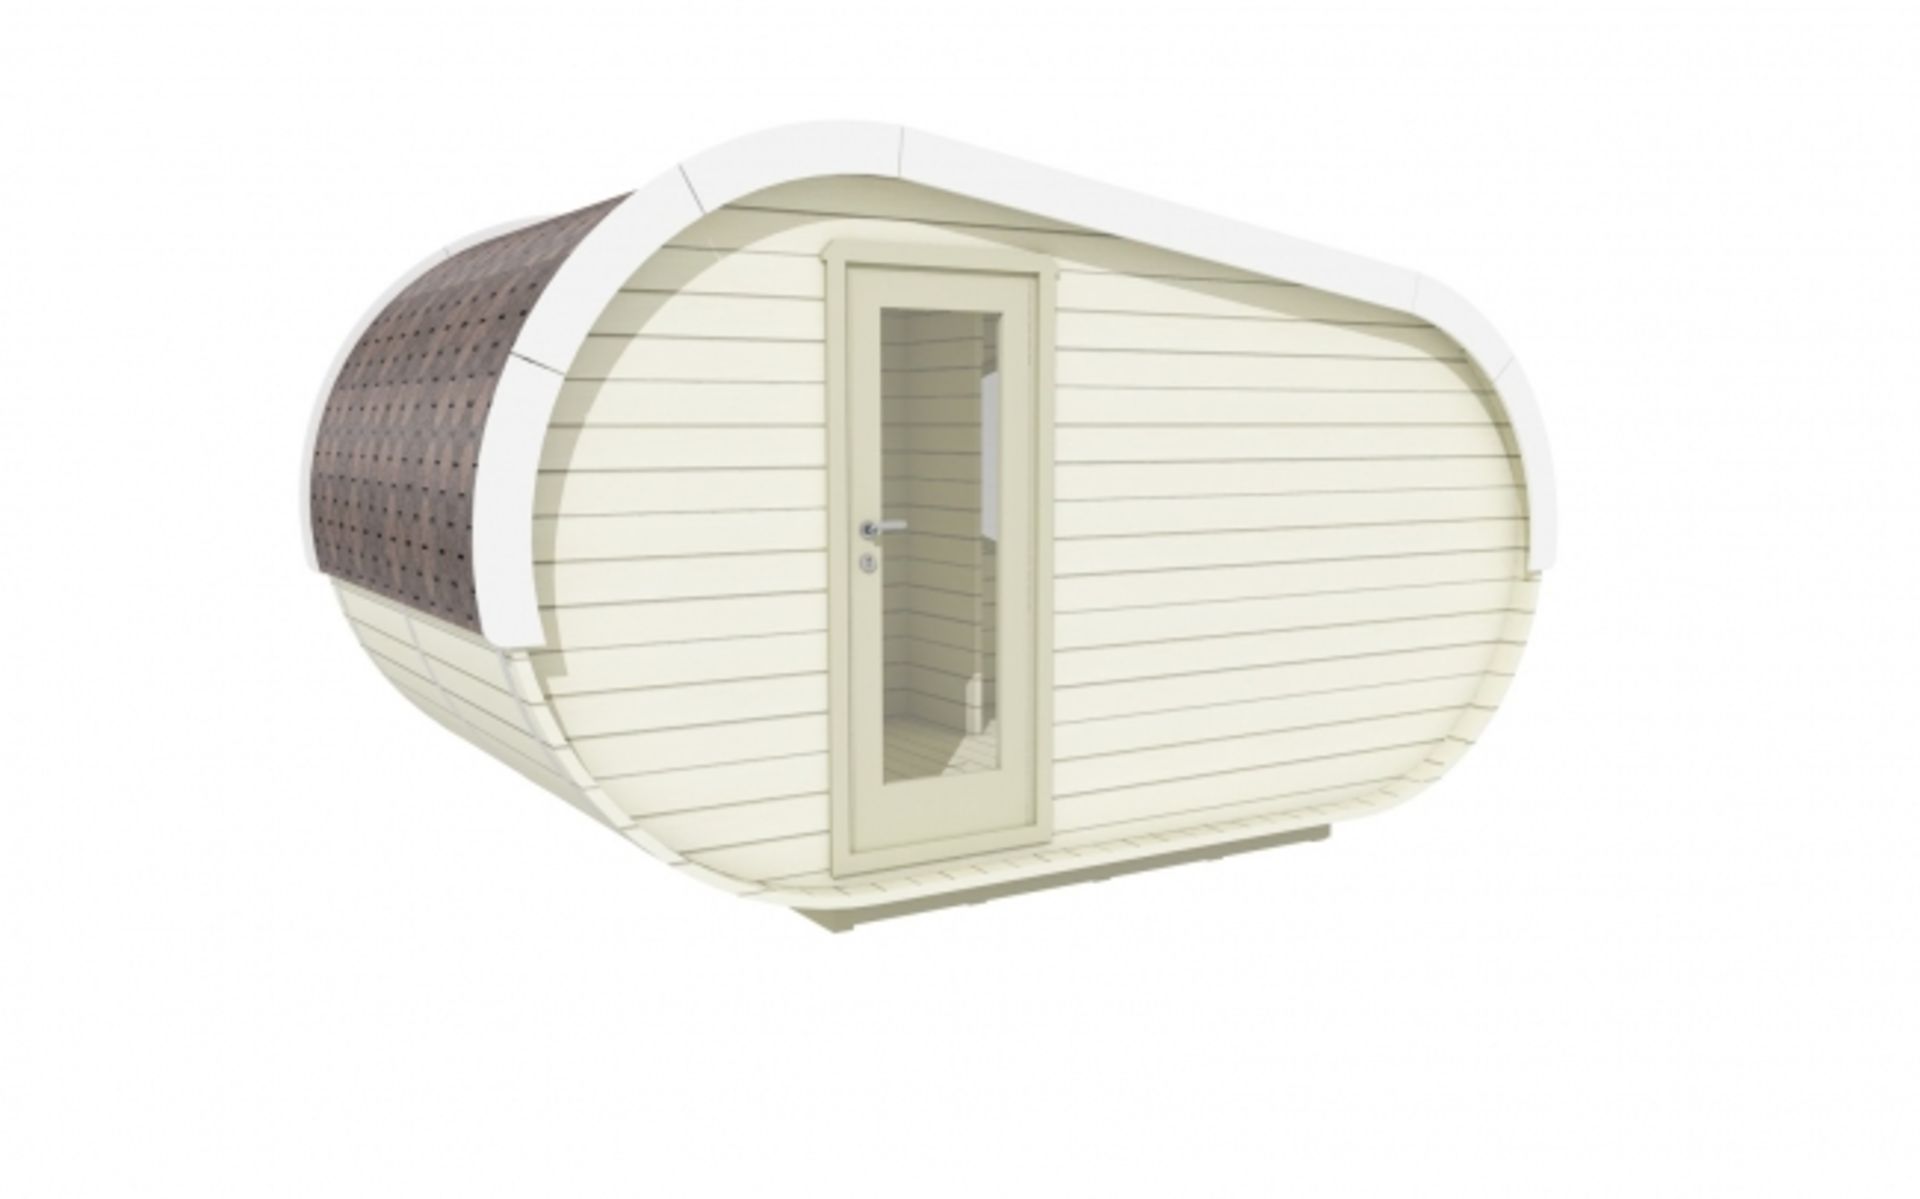 + VAT Brand New 2.4 x 4.3m Delight Camping Pod - Made From Spruce - Roof Covered With Bitumen